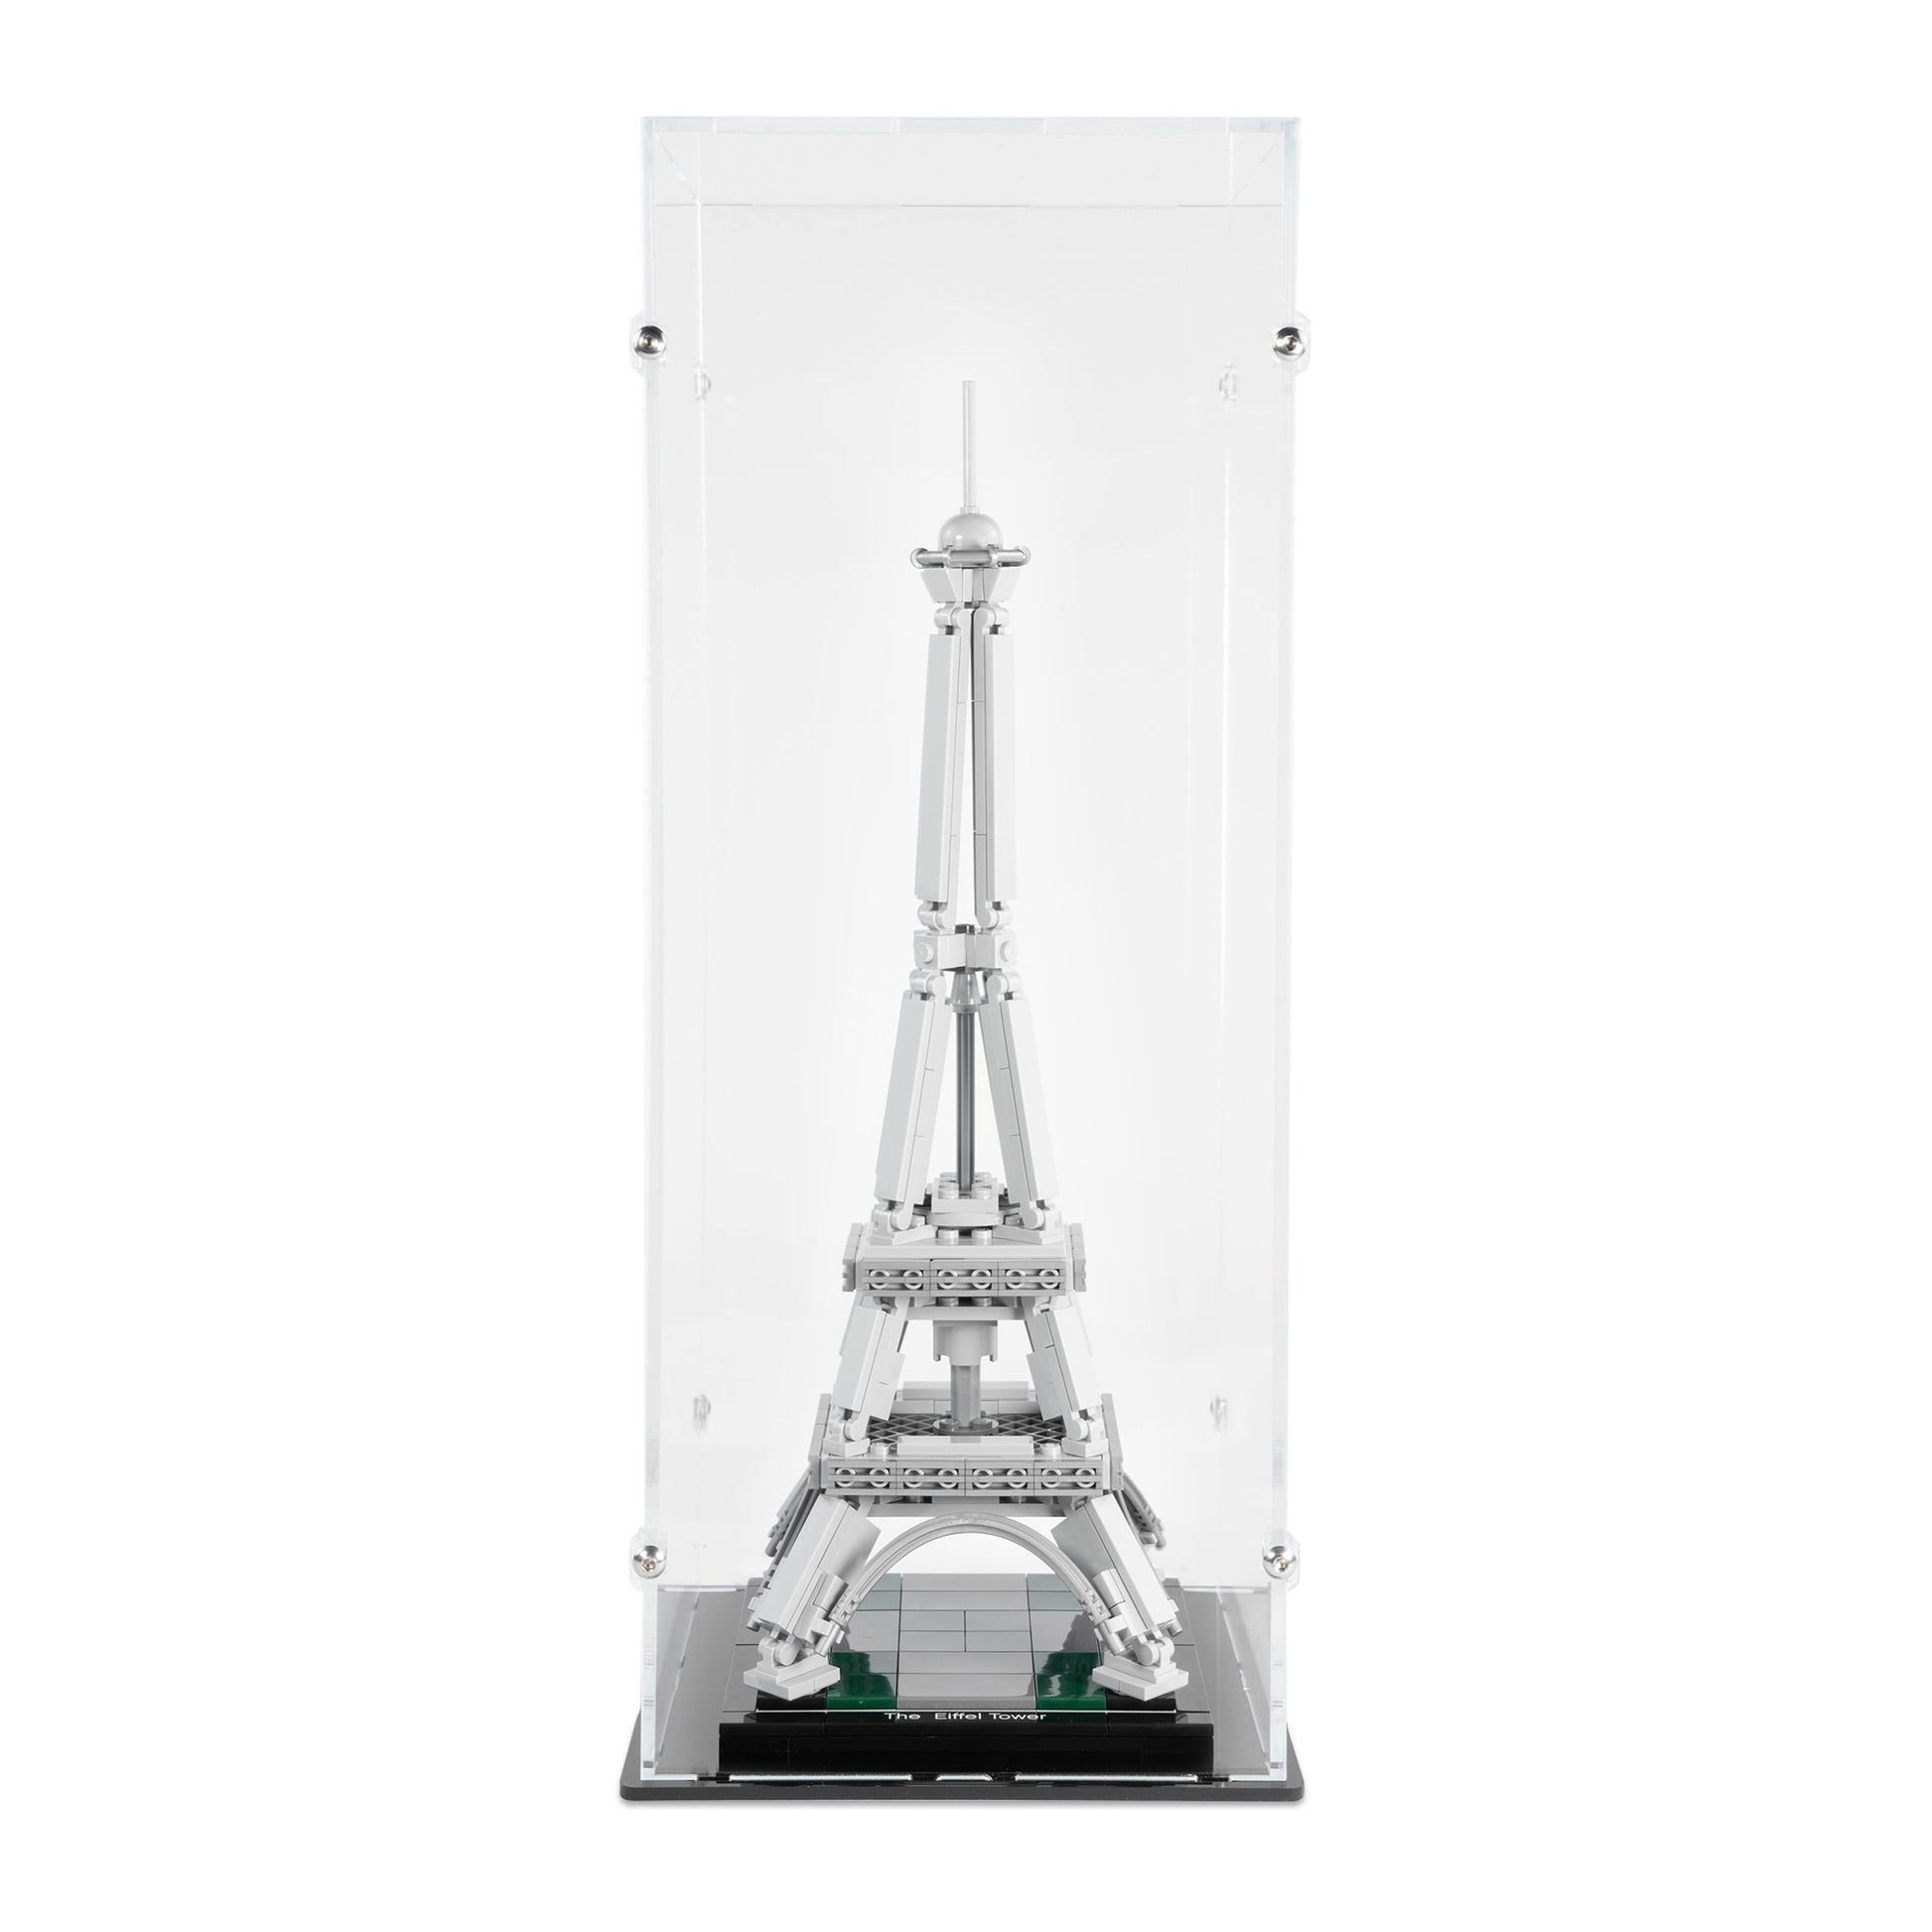 Front view of LEGO 21019 The Eiffel Tower Display Case.